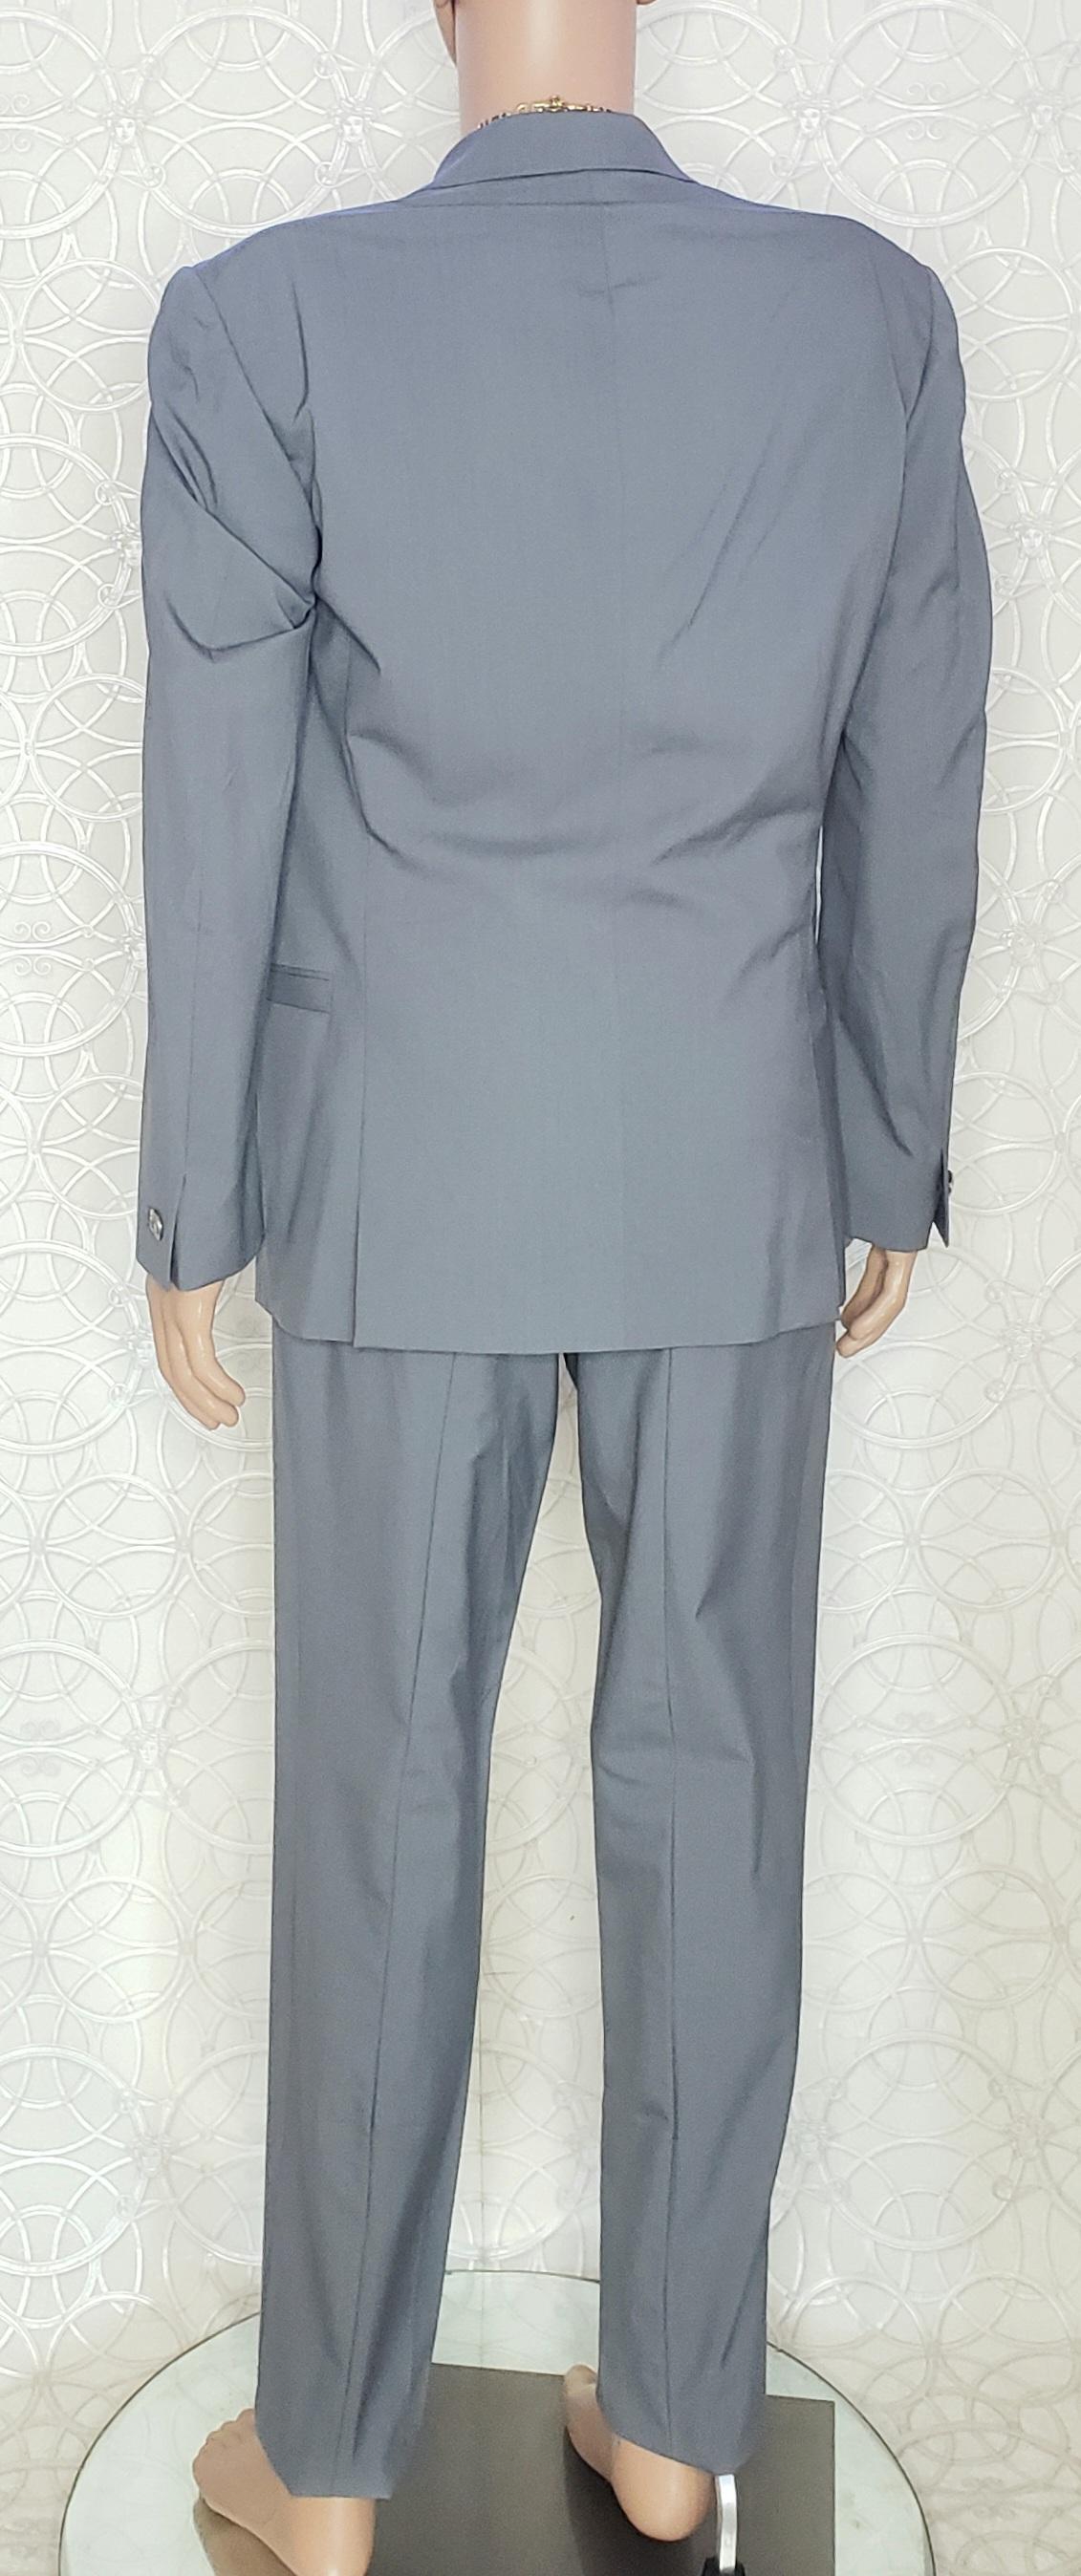 VERSACE S/S 2012 look # 30 BRAND NEW GRAY SUIT 48 - 38 (M) For Sale 1